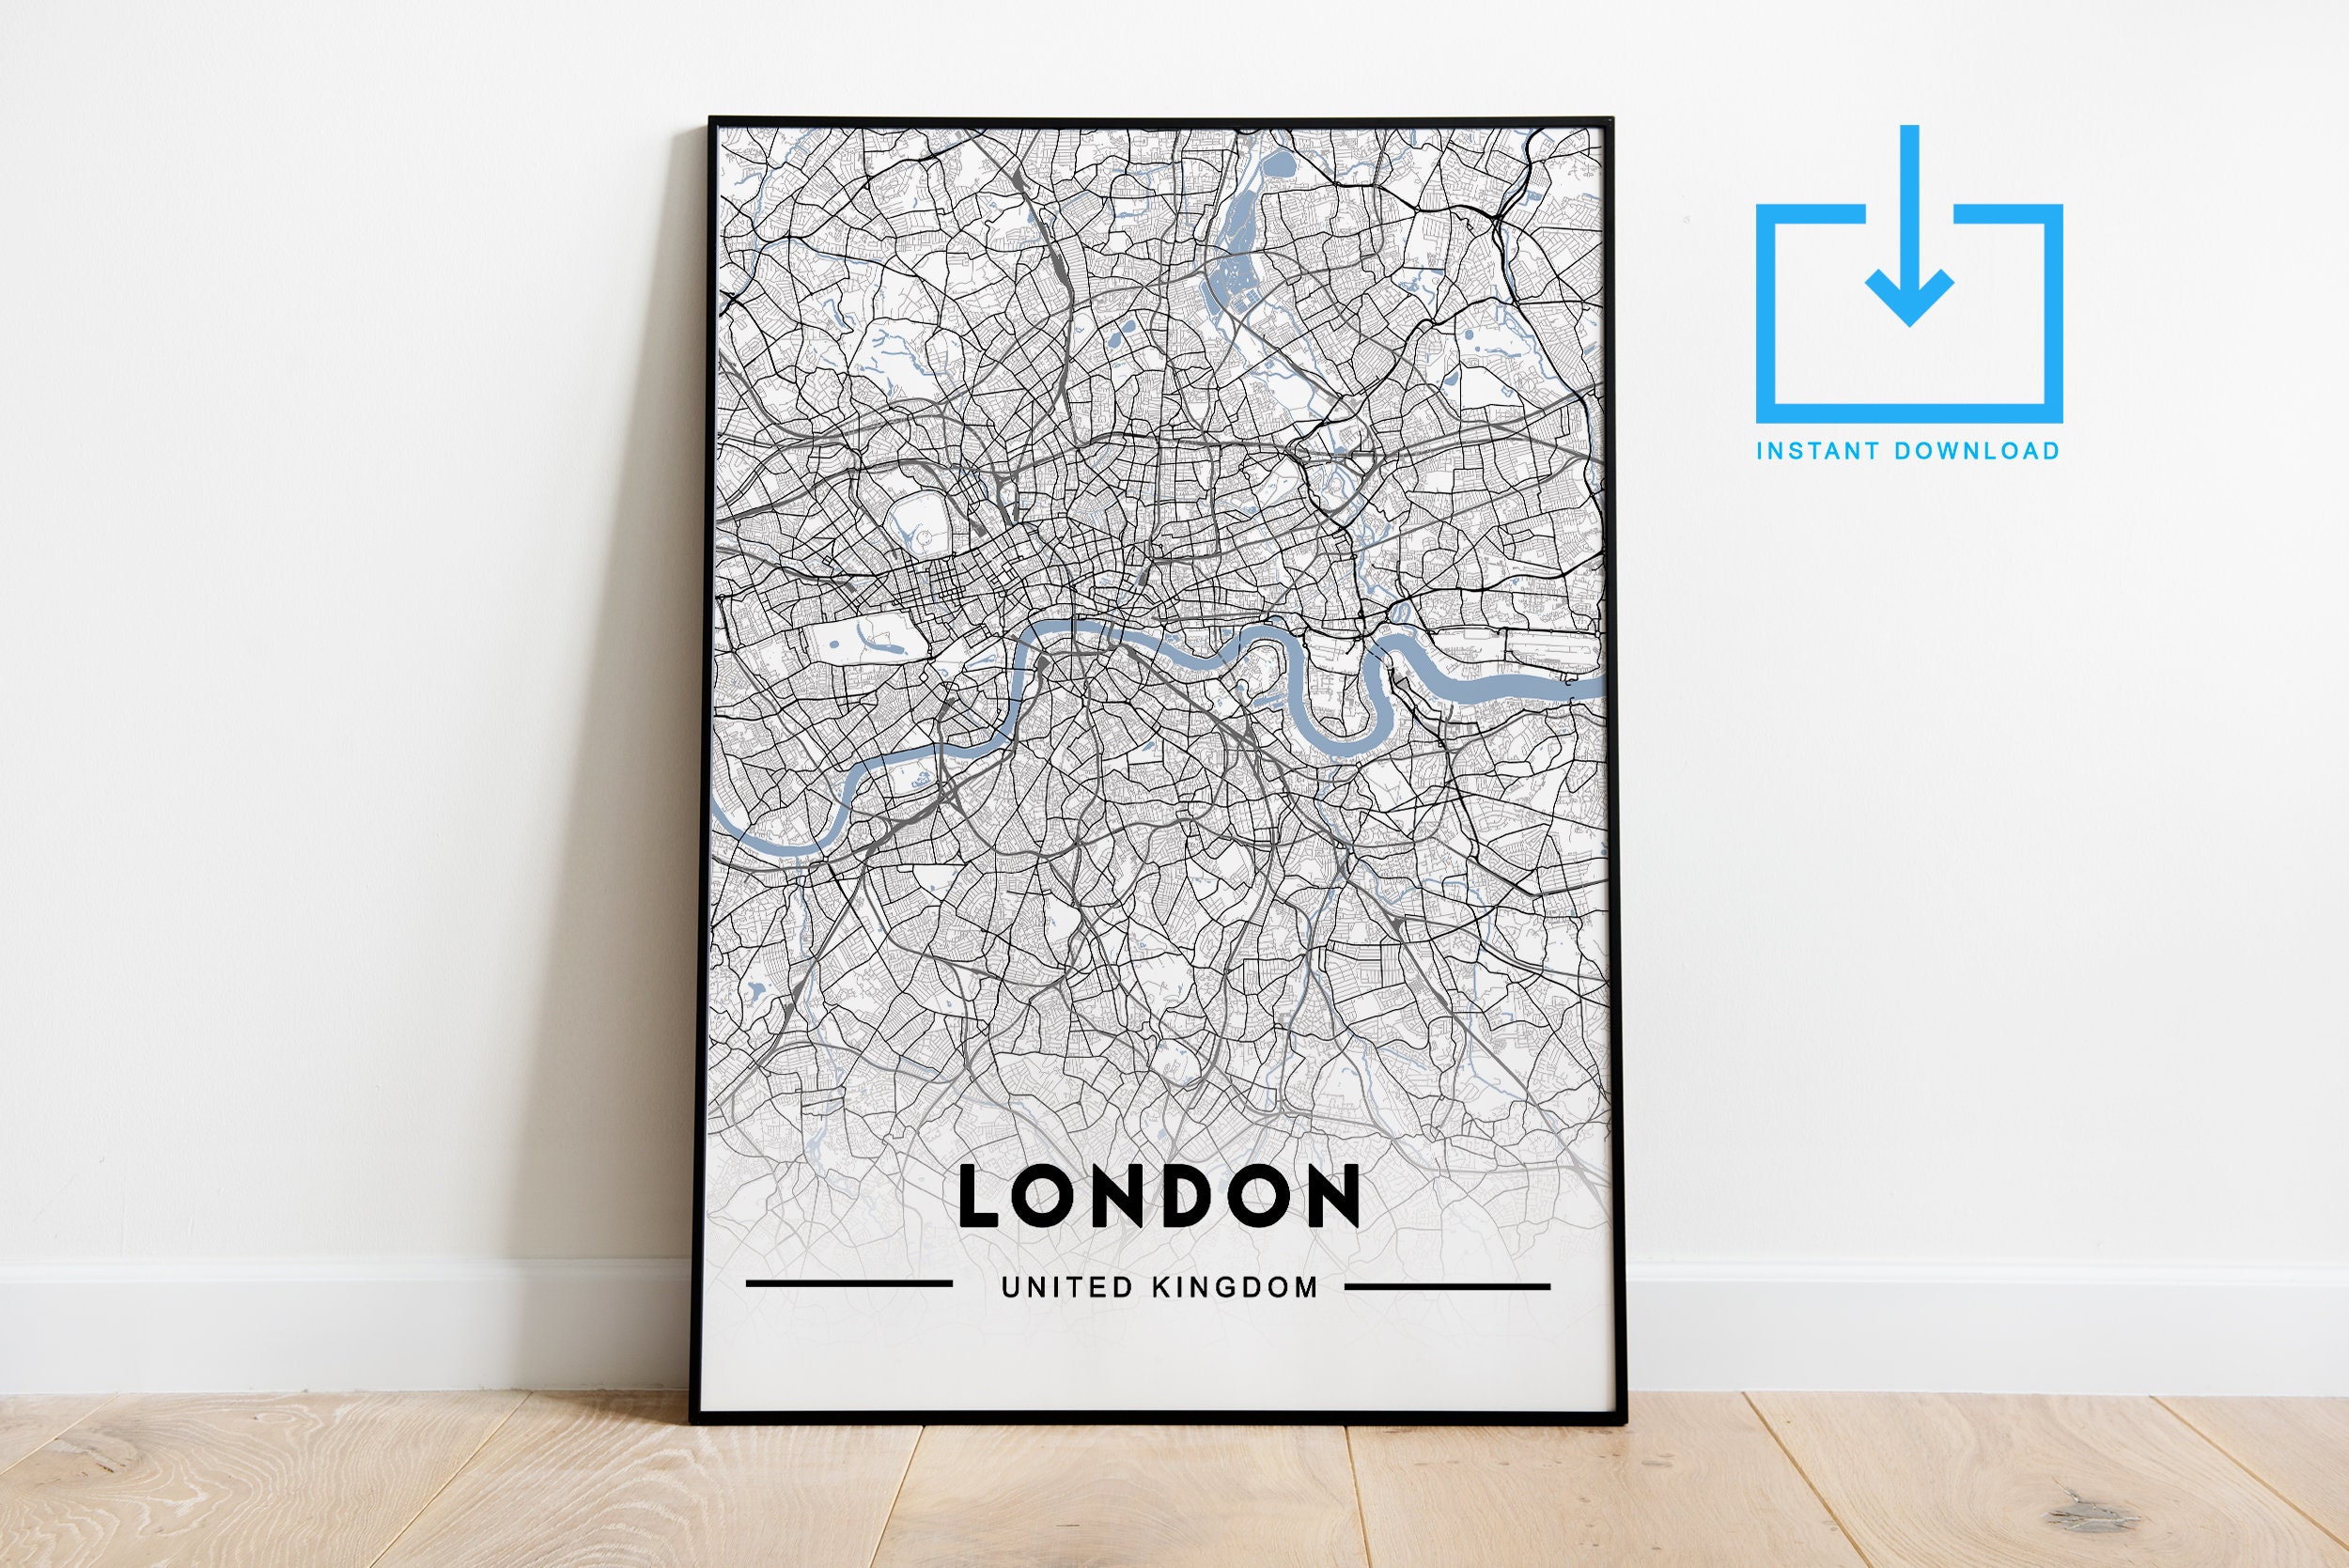 London City Map Street Map Digital Print Wall Art High Quality Motivational Quote Poster *INSTANT DOWNLOAD* Printable Art